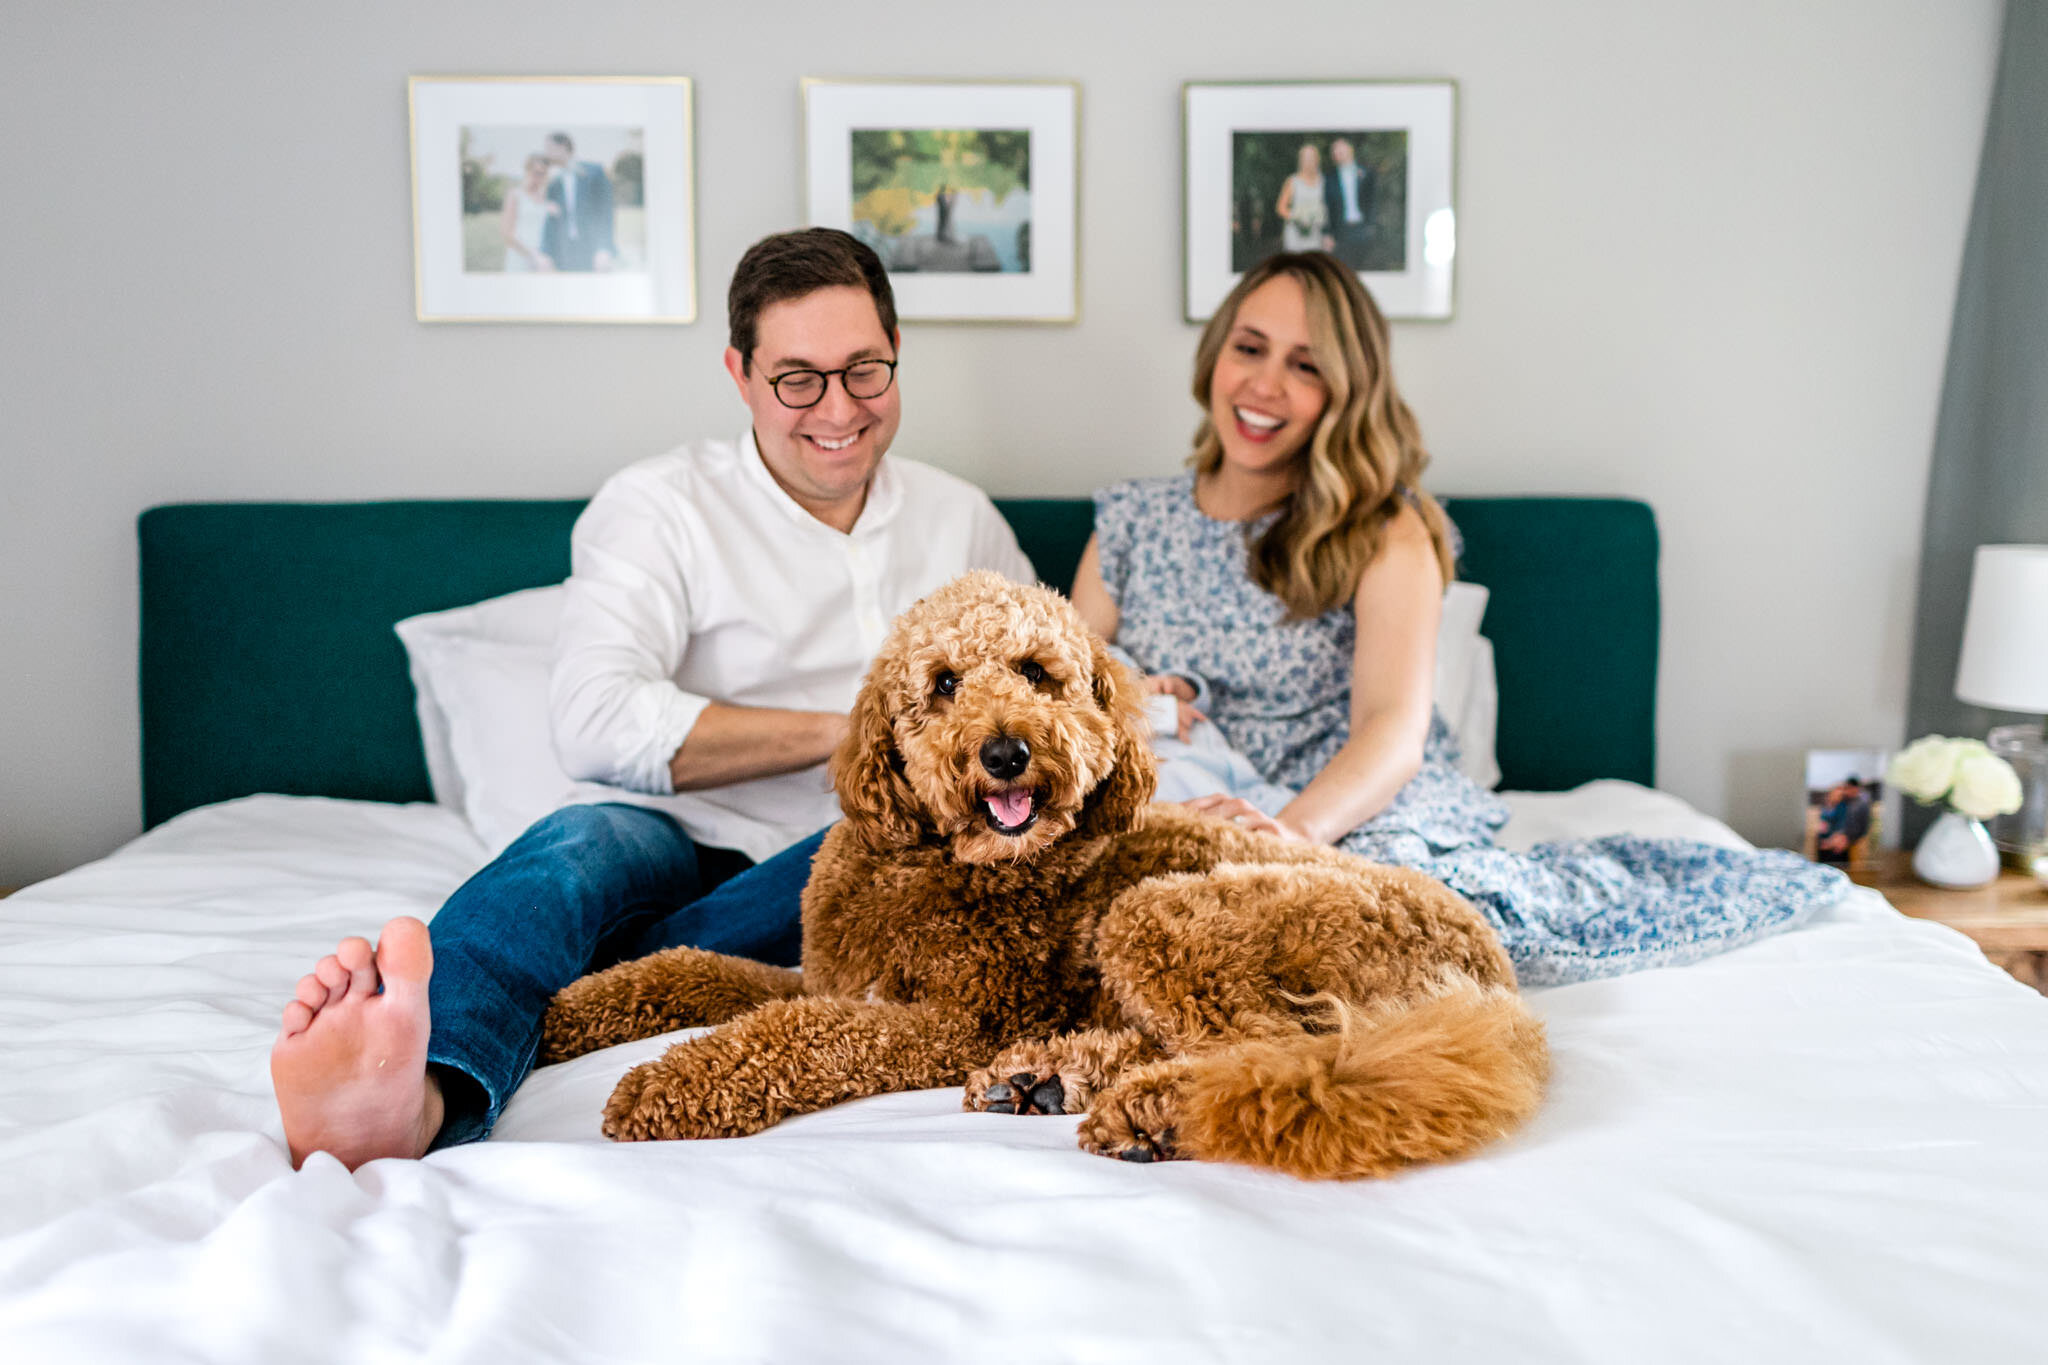 Dog sitting on bed with family | Greensboro Newborn Photographer | By G. Lin Photography